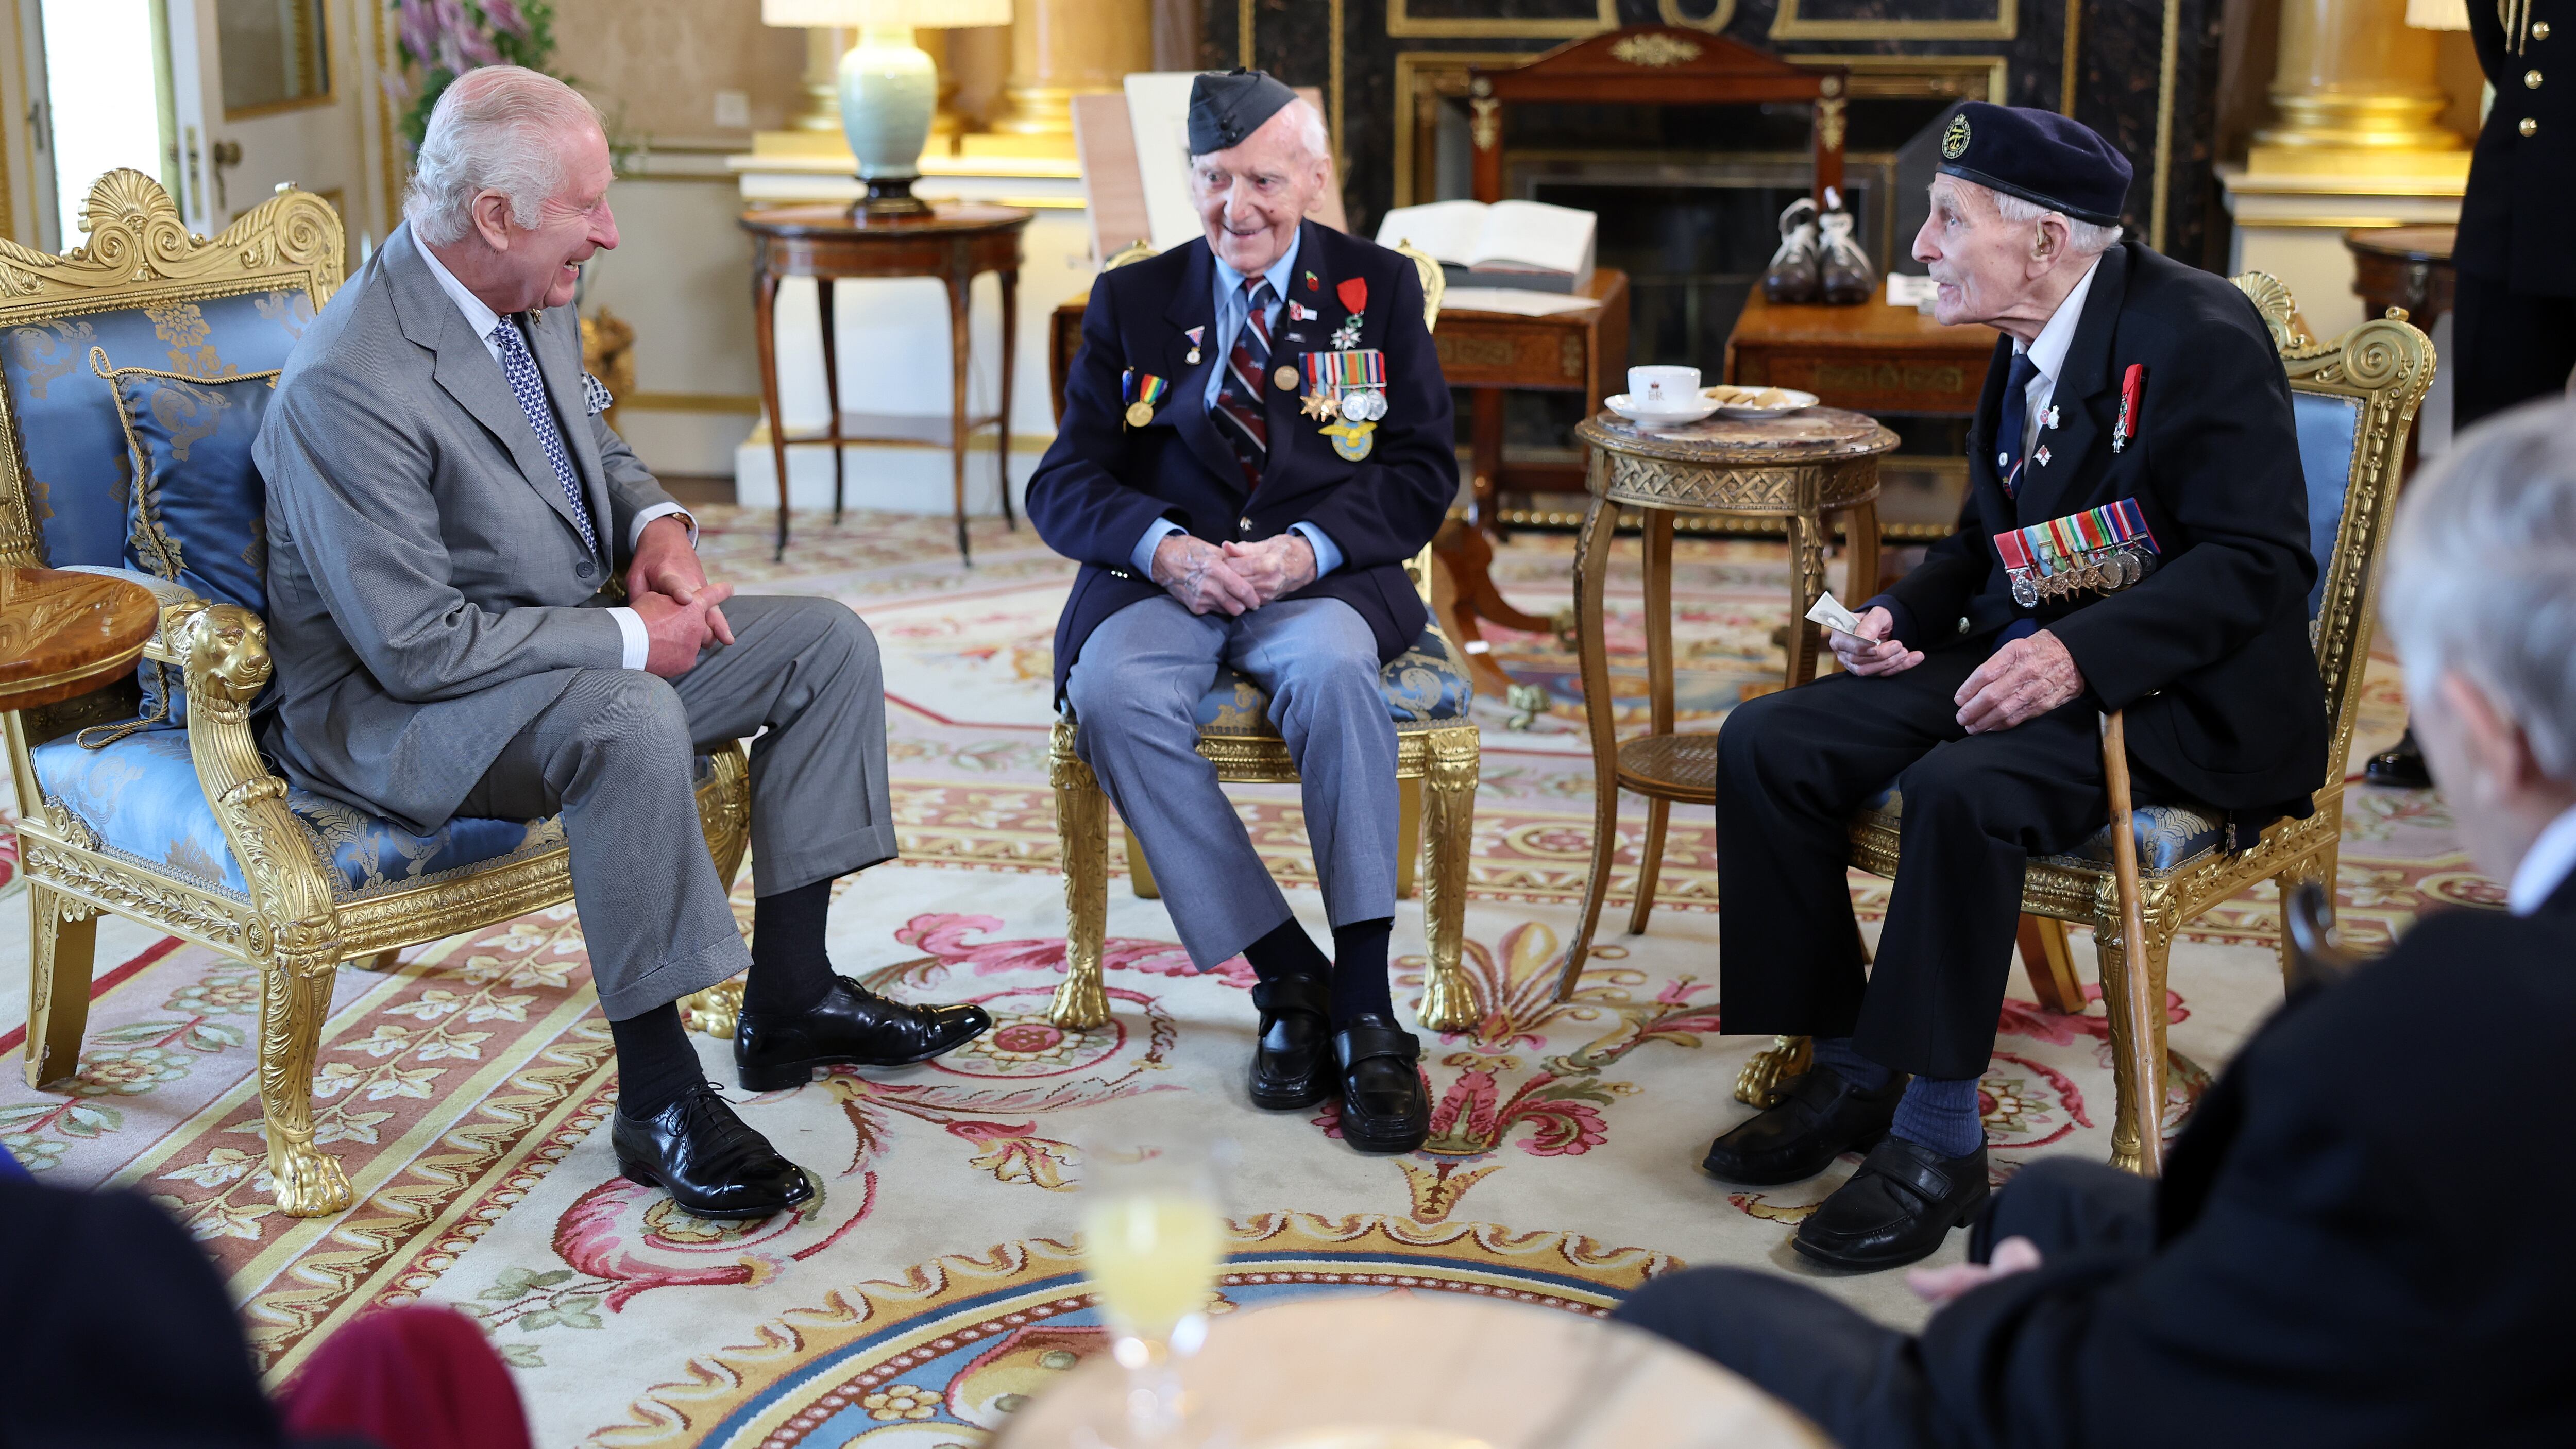 The King and Queen have hosted four D-Day veterans at Buckingham Palace to mark the 80th anniversary of the Normandy landings